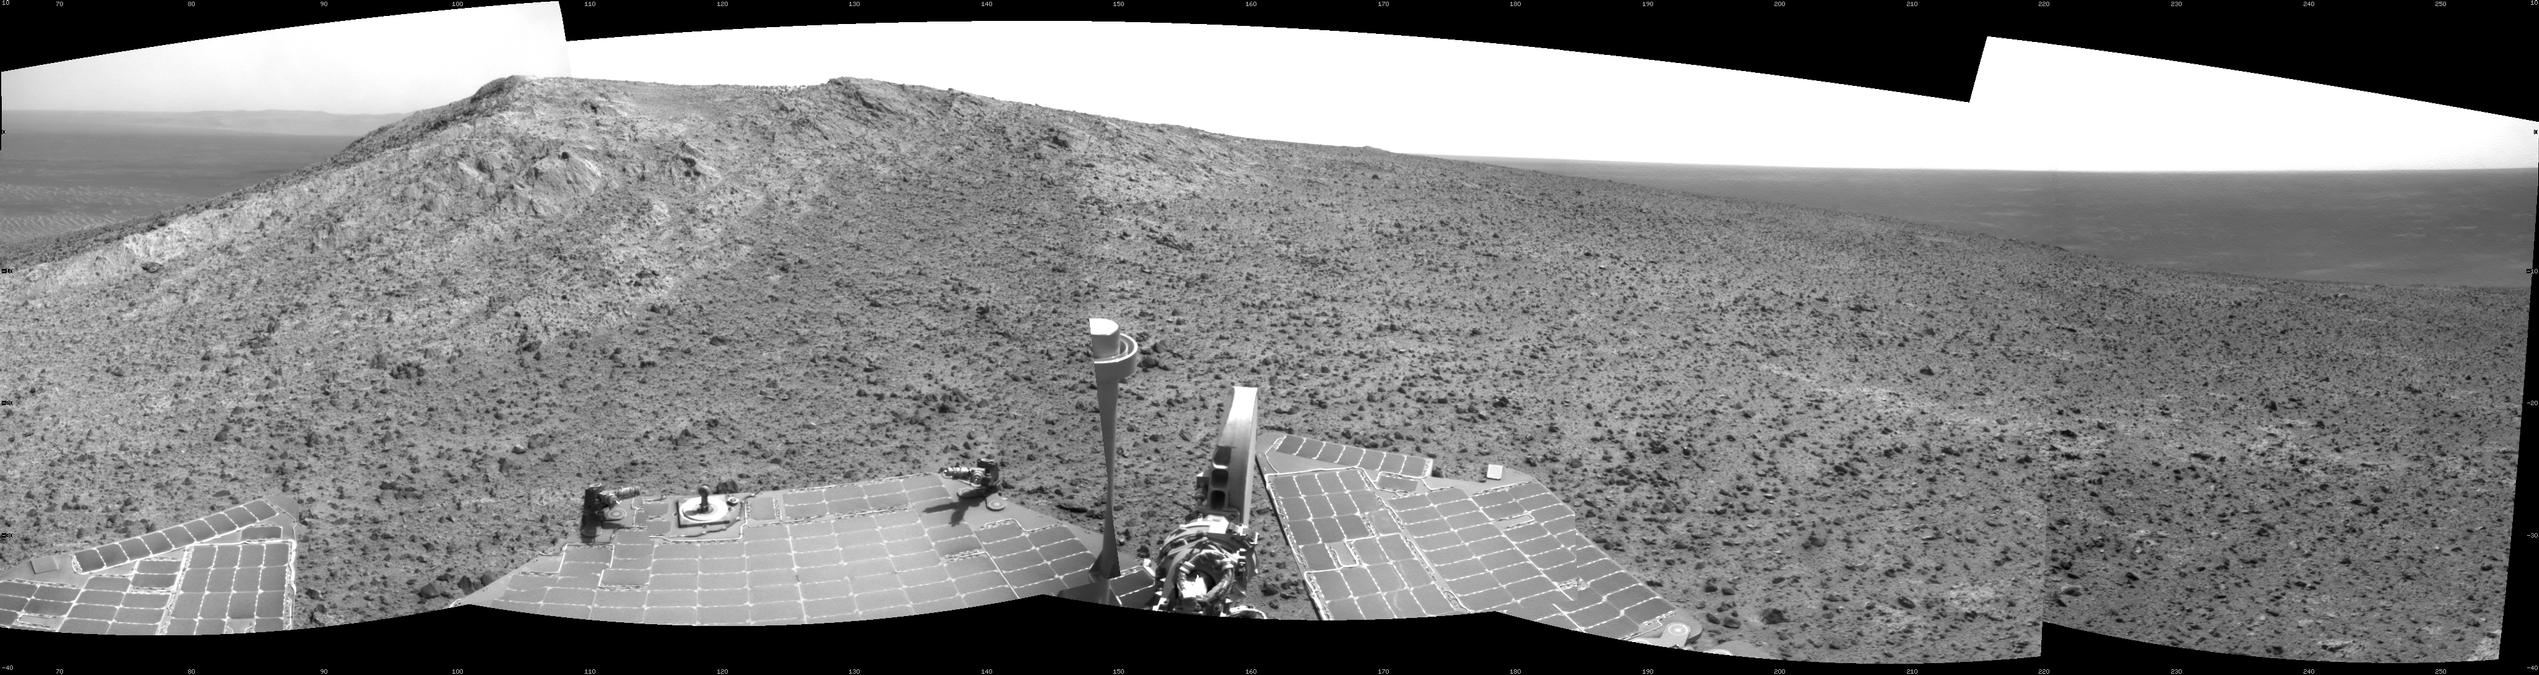 Opportunity's Approach to 'Cape Tribulation' Summit